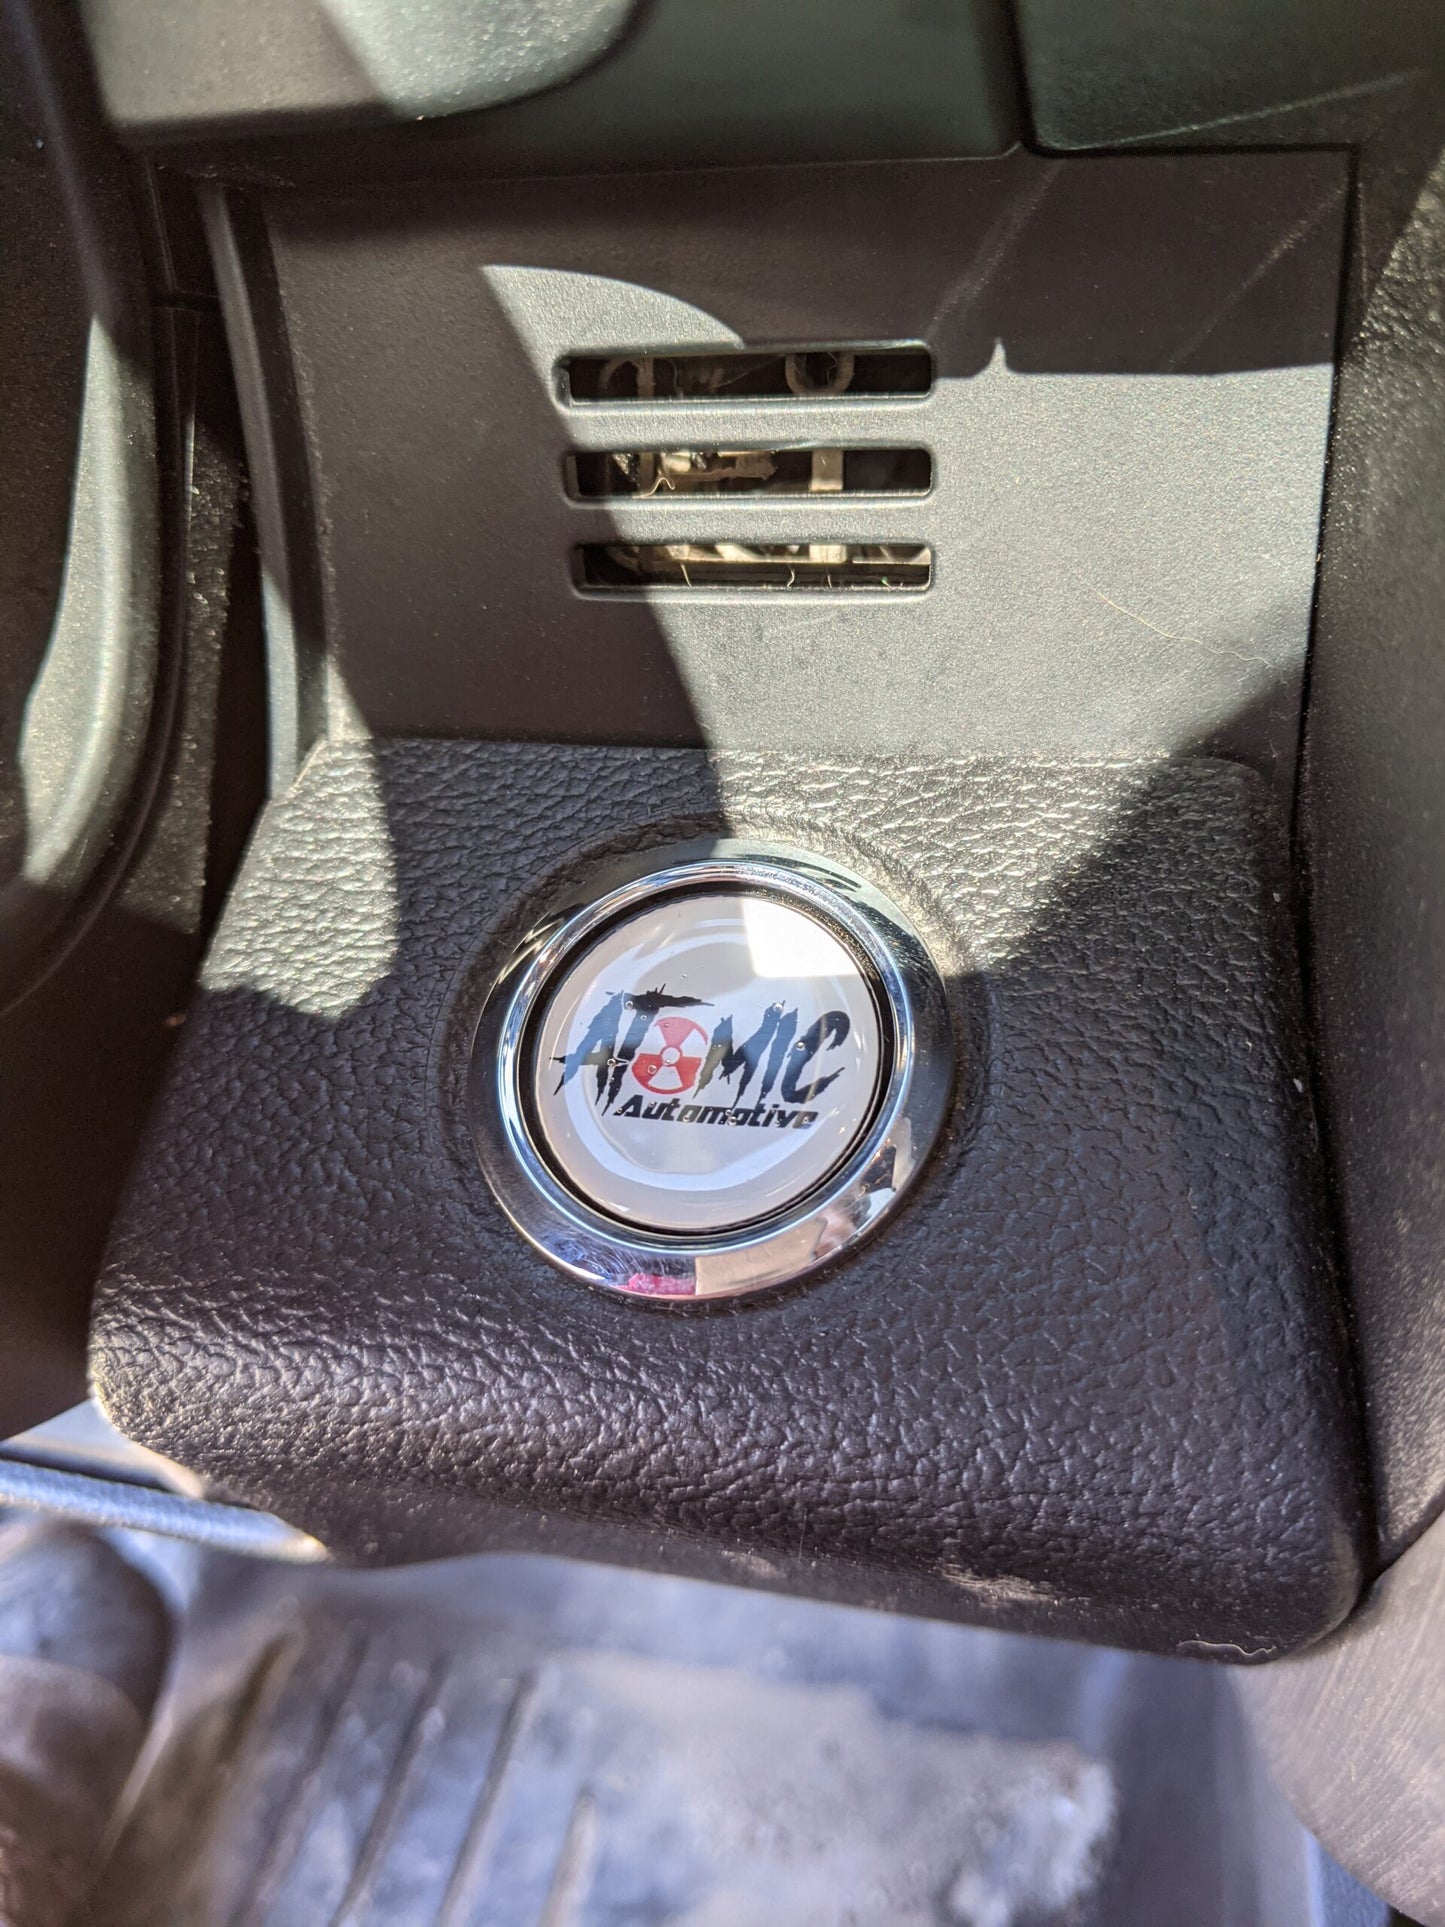 Mopar Engine Start Button Overlay - Officially Licensed Product